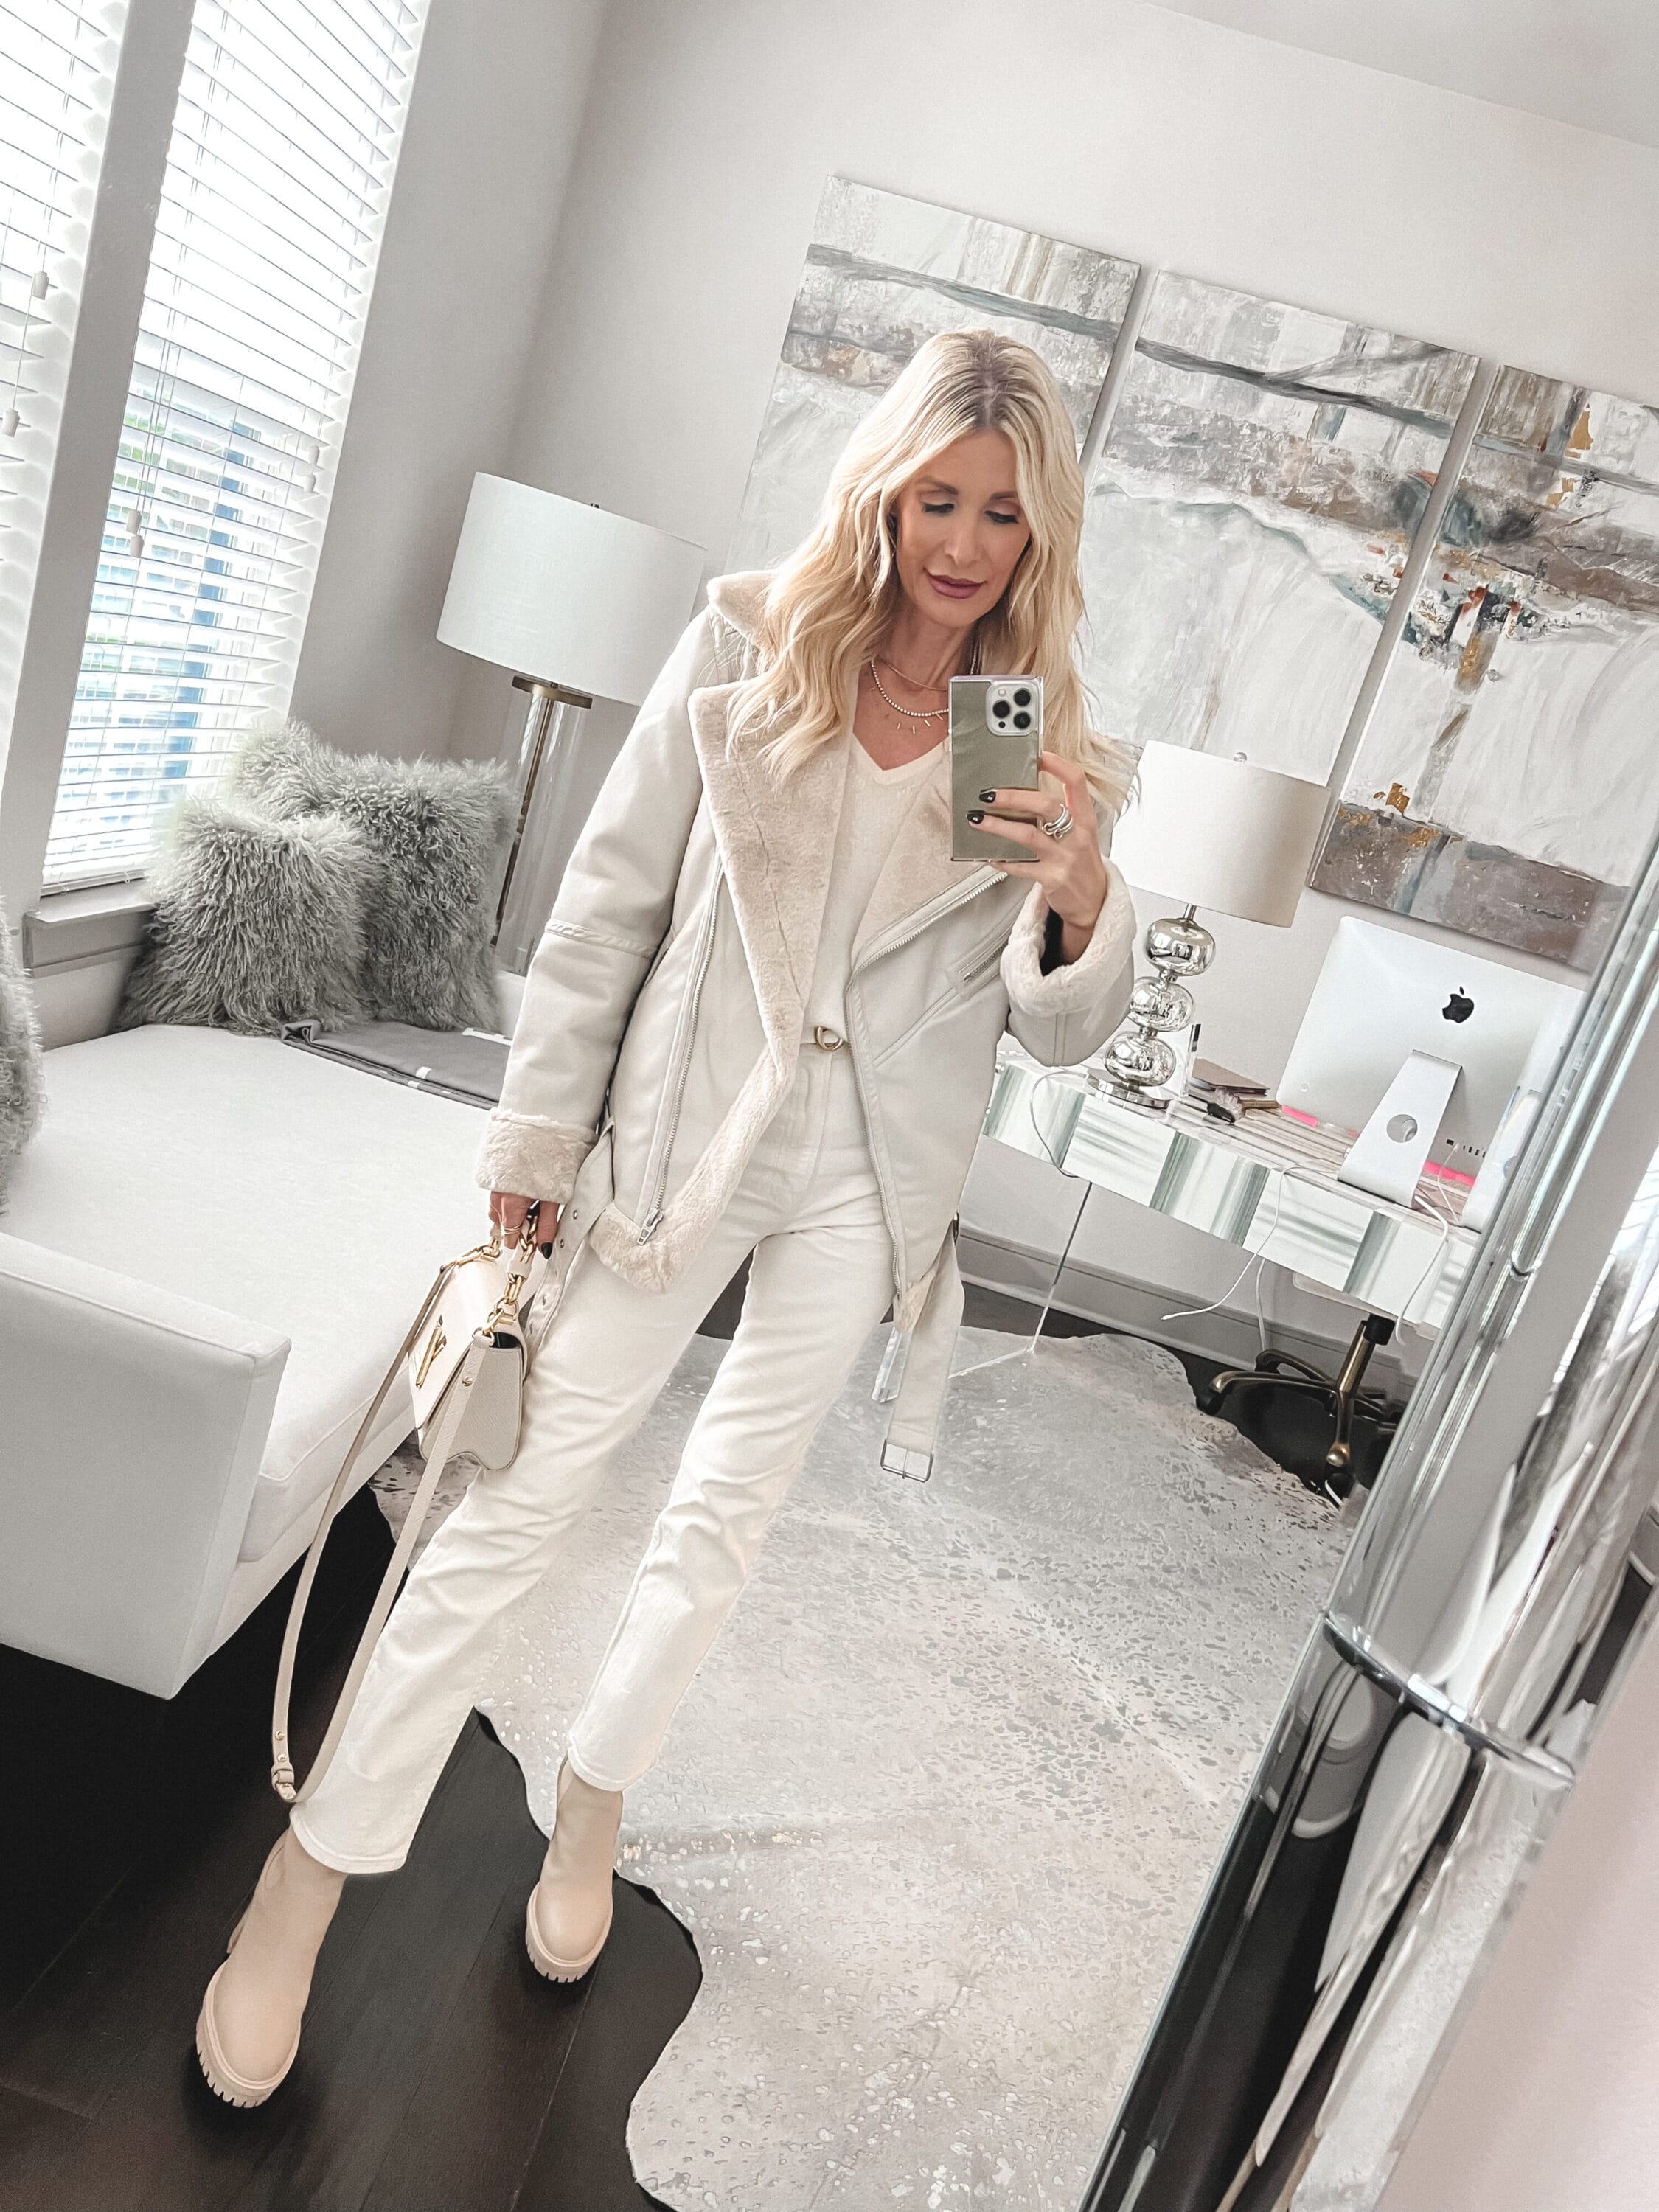 Dallas fashion influencer wearing a white faux fur jacker with ivory jeans and white boots.